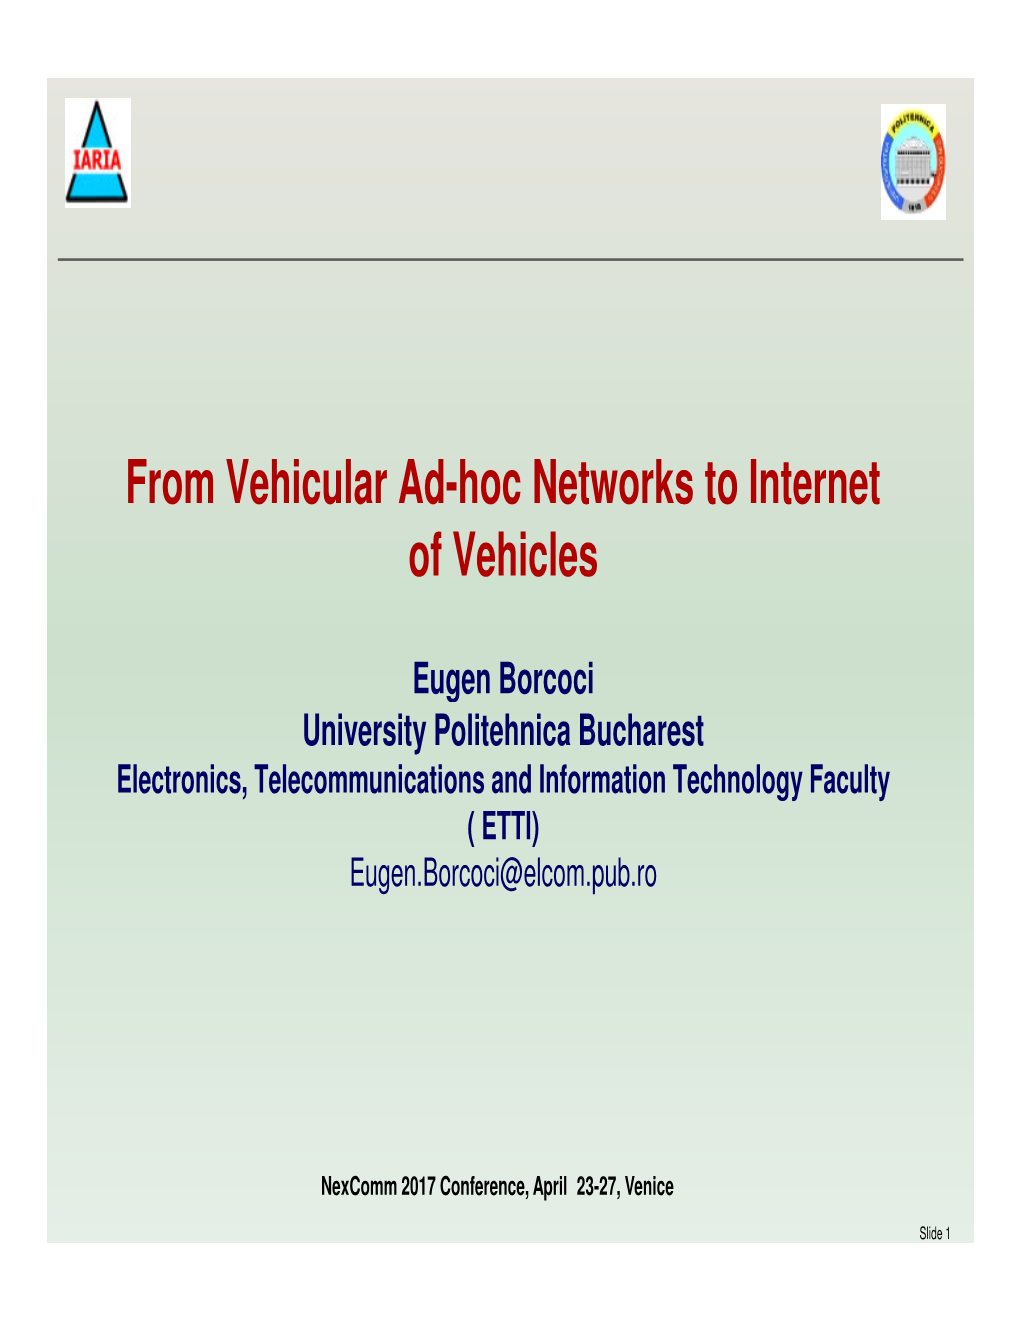 From Vehicular Ad-Hoc Networks to Internet of Vehicles